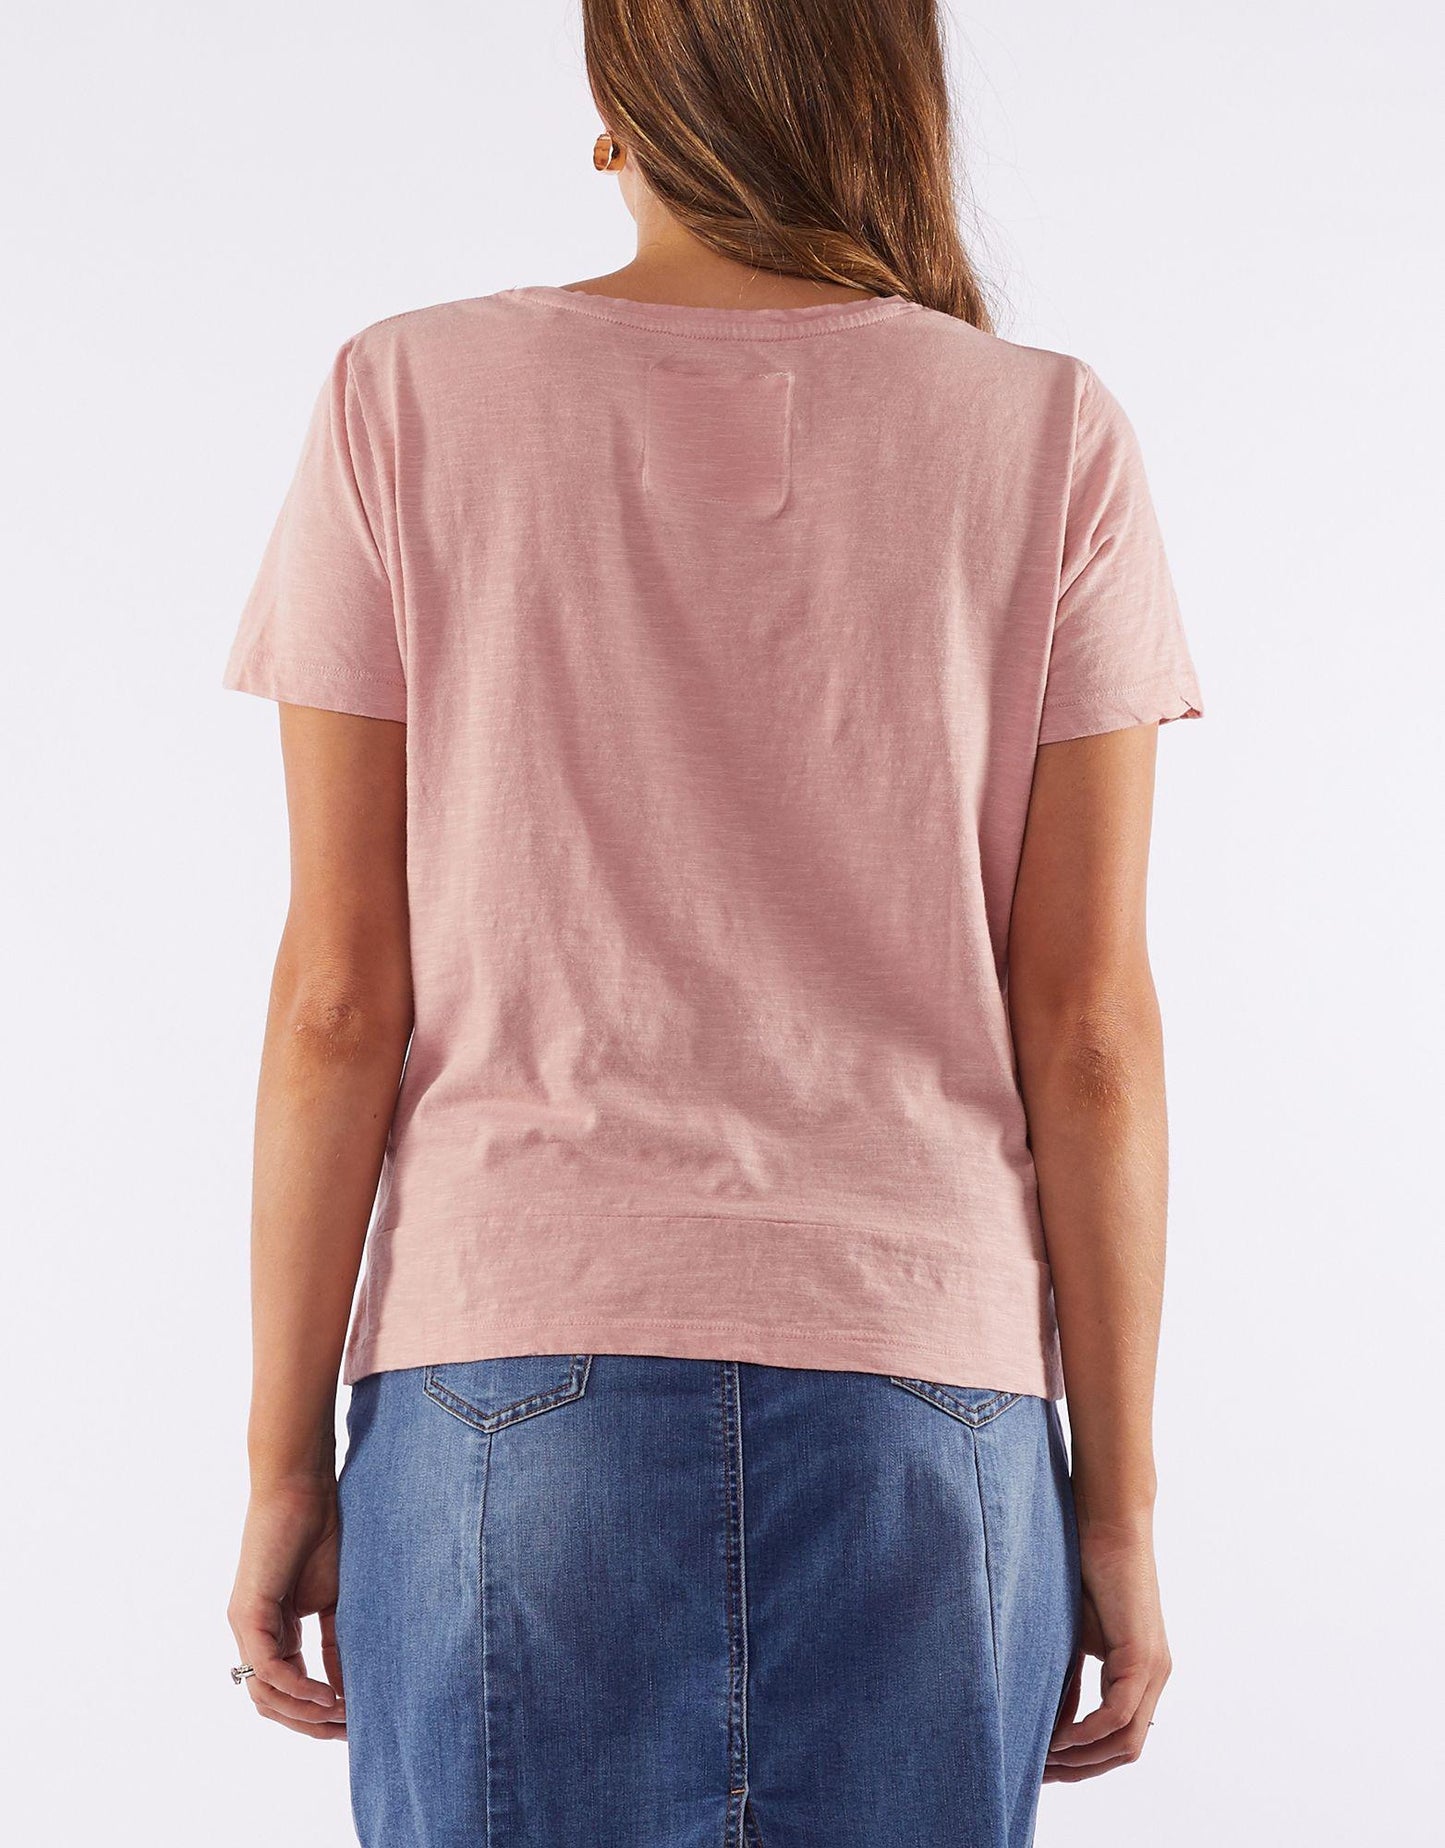 Knot Front Crop Tee - Pink - Foxwood - FUDGE Gifts Home Lifestyle